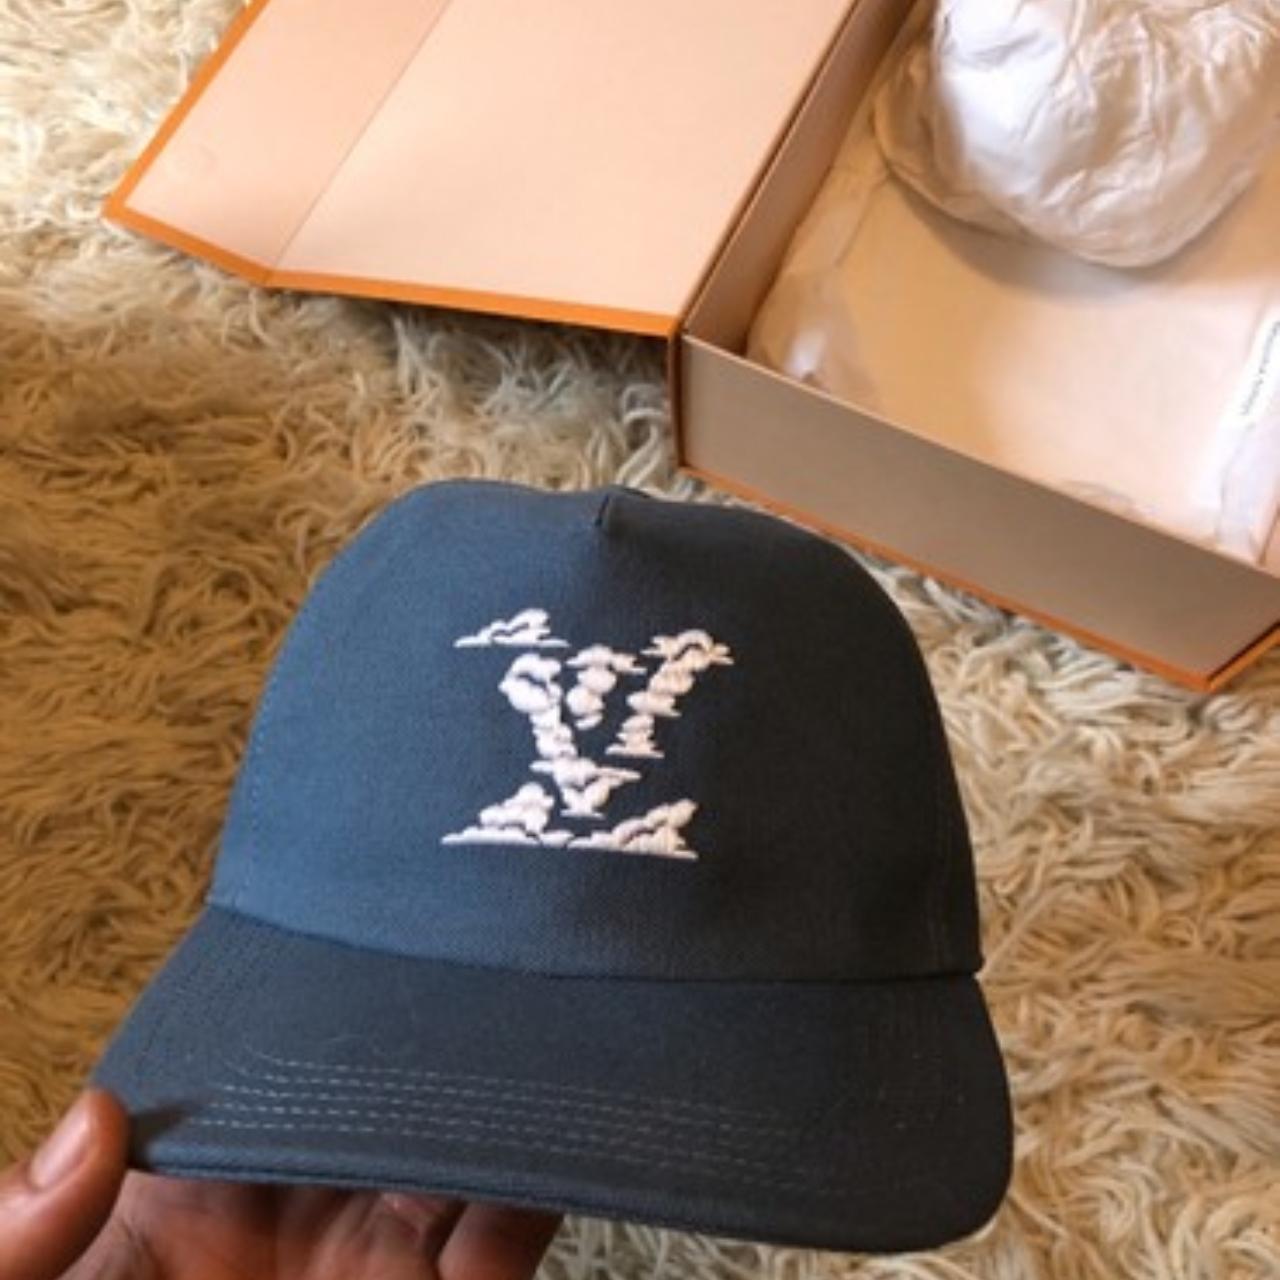 Louis Vuitton - LV Cloud Logo Embroidered Hat – eluXive